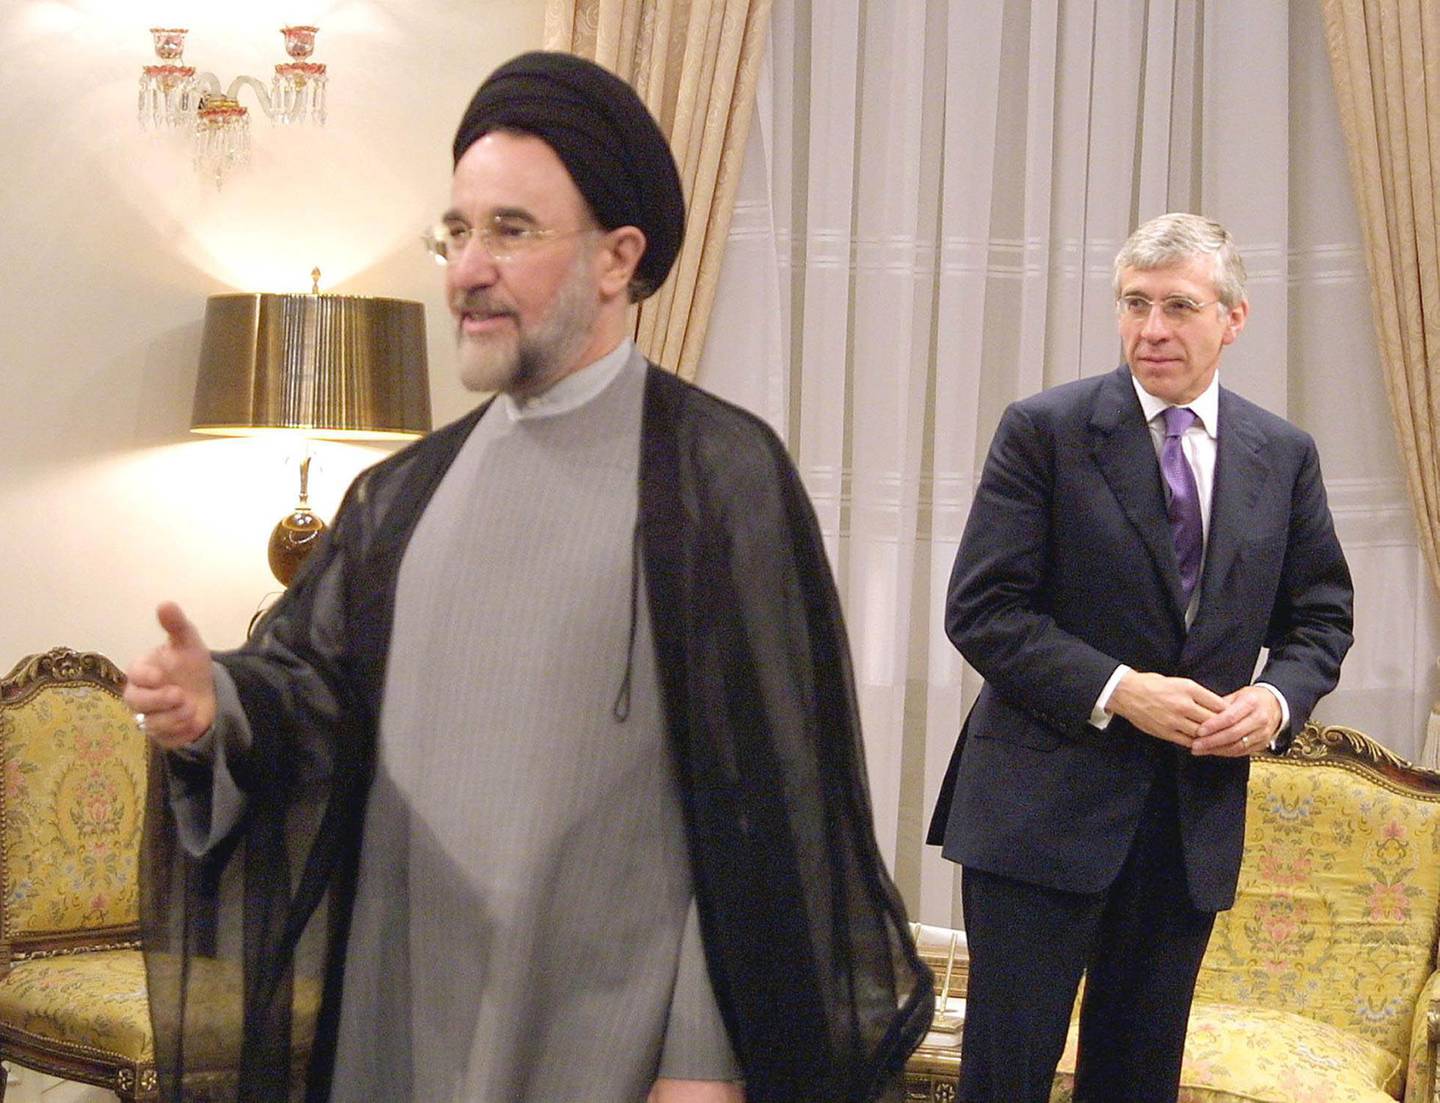 Iranian President Mohammad Khatami (L) gestures after receiving British Foreign Secretary Jack Straw at his office in Tehran 25 September 2001. Straw, the most senior British official to visit Iran since the Islamic revolution in 1979, said that he was carrying no message from the United States as it prepares for military action against Afghanistan. (Photo by ATTA KENARE / AFP)